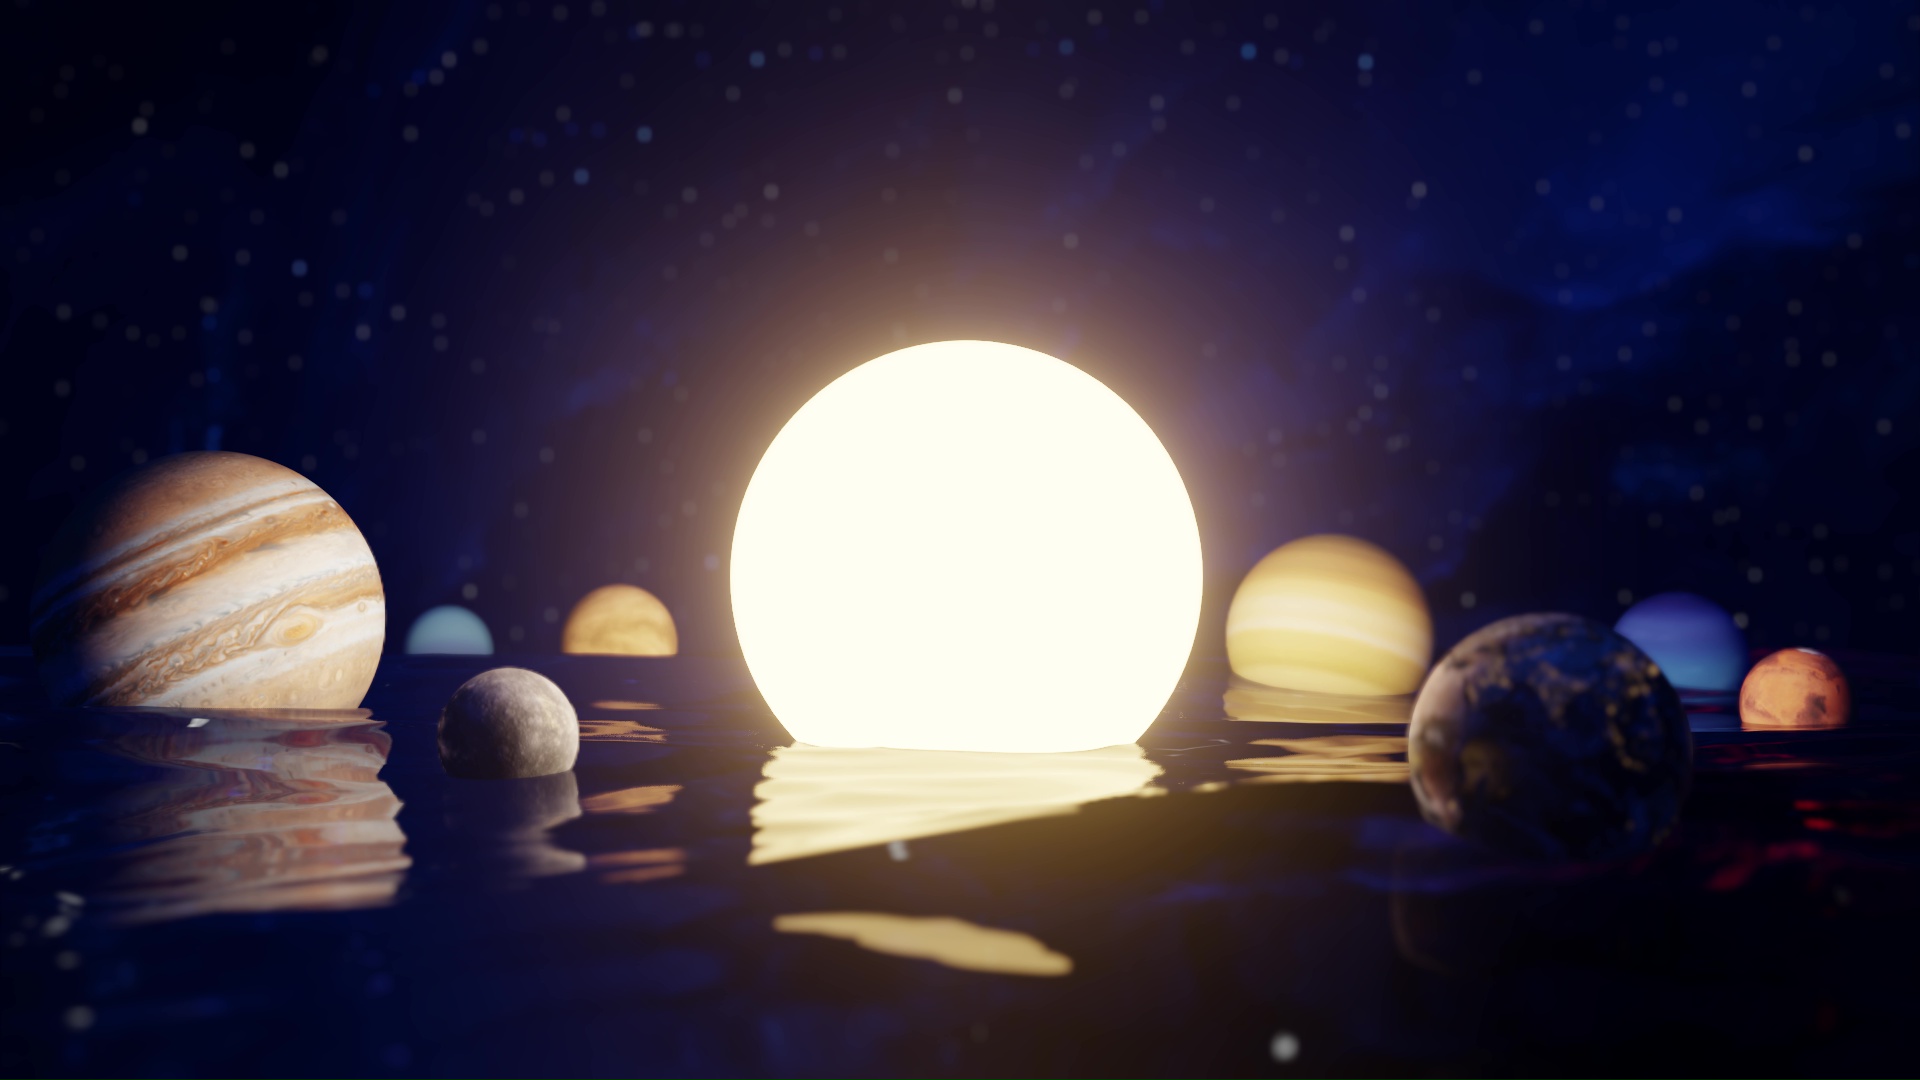 1 Solar System Live Wallpapers, Animated Wallpapers - MoeWalls